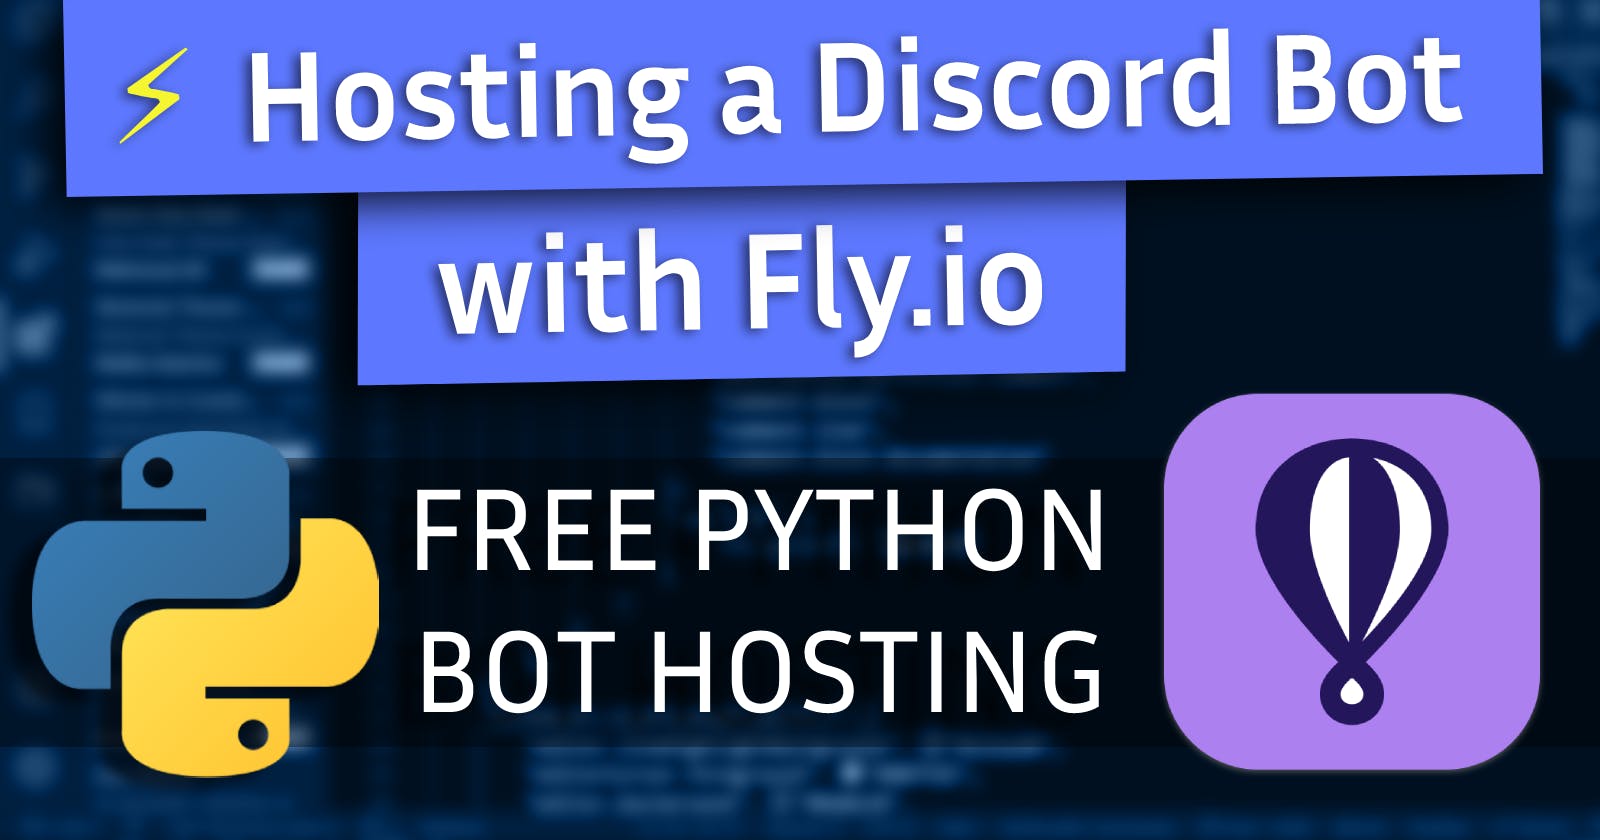 Hosting a Python Discord Bot for Free with Fly.io